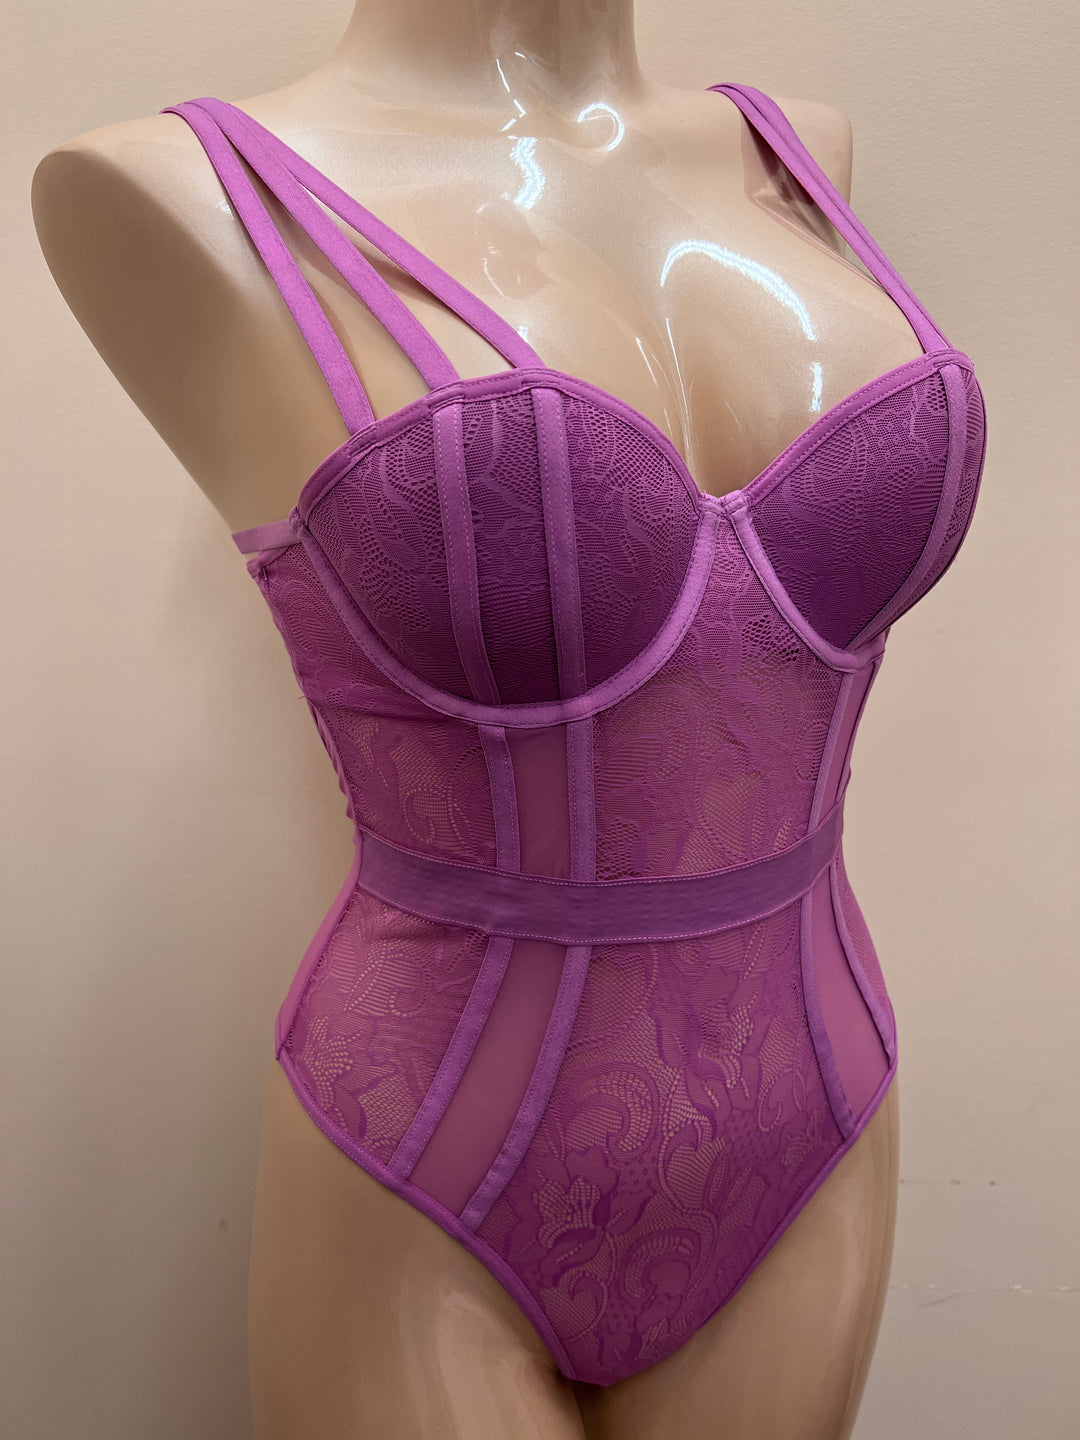 Anika Lace Bodysuit - Radiant Orchid - Size Small